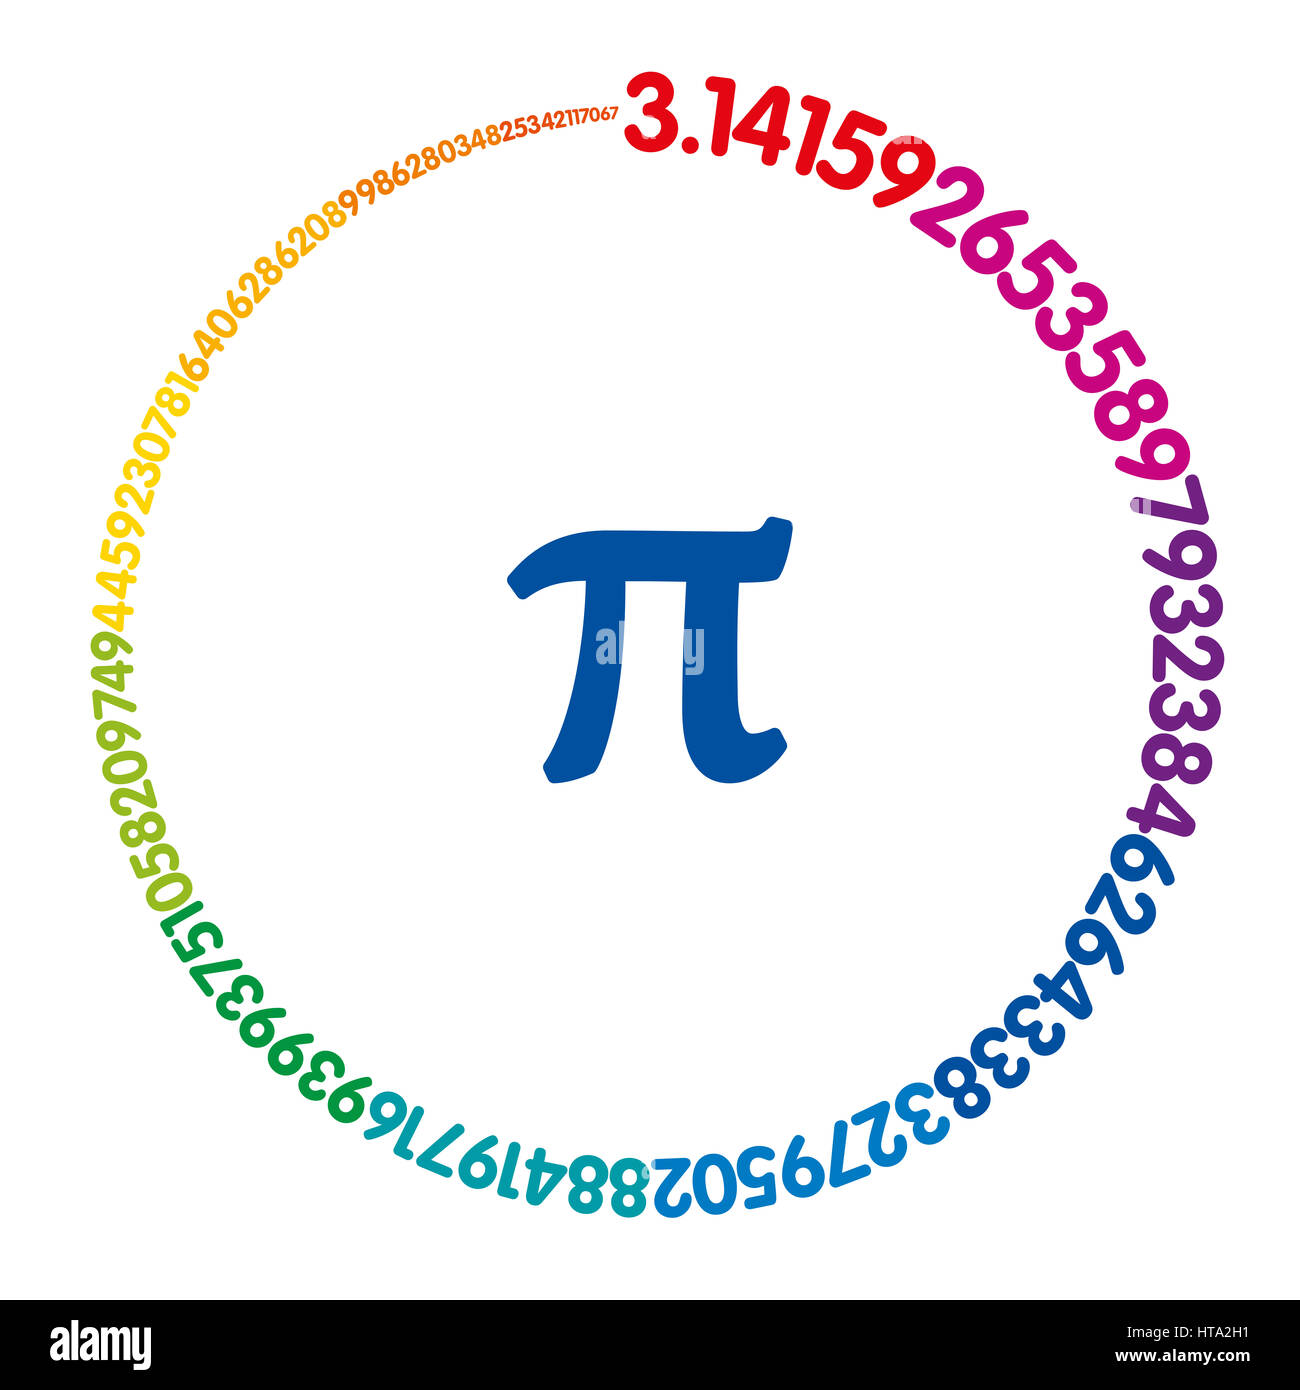 Hundred digits of number Pi forming a rainbow colored circle. Value of infinite number Pi accurate to ninety-nine decimal places. Spectrum colored. Stock Photo